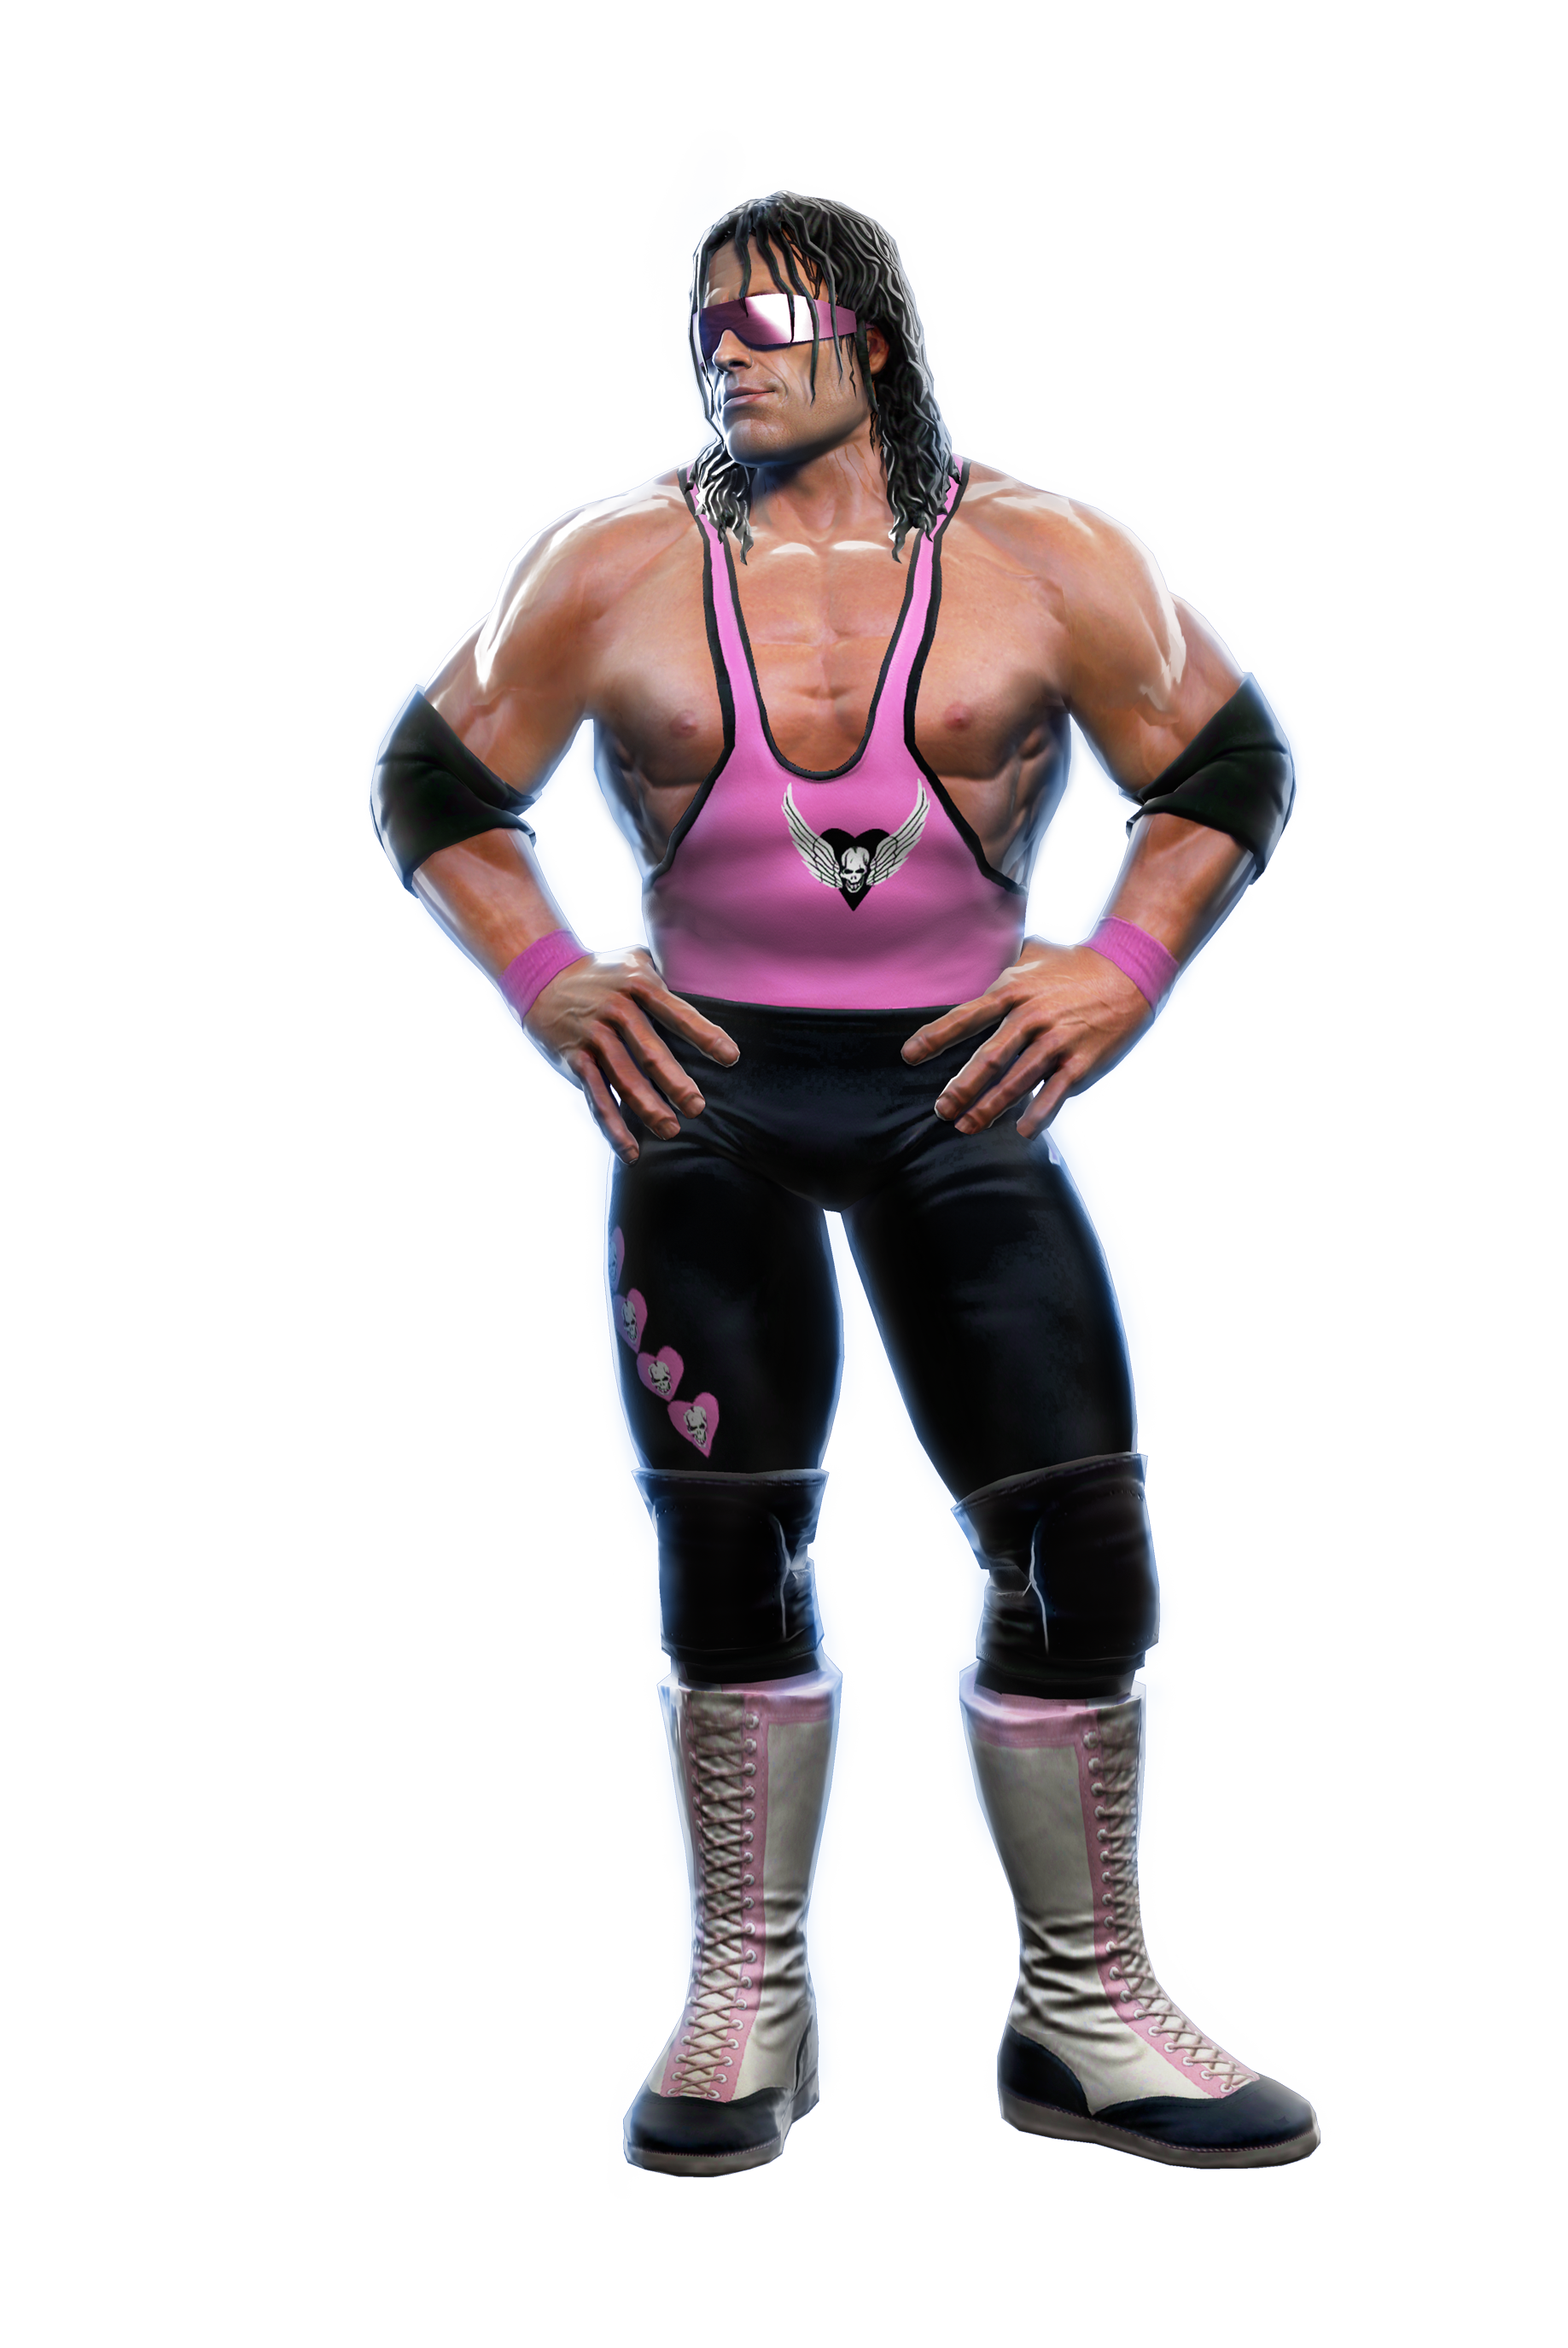 https://static.wikia.nocookie.net/wweallstars/images/b/bb/Bret_Hart.png/revision/latest?cb=20110402234702